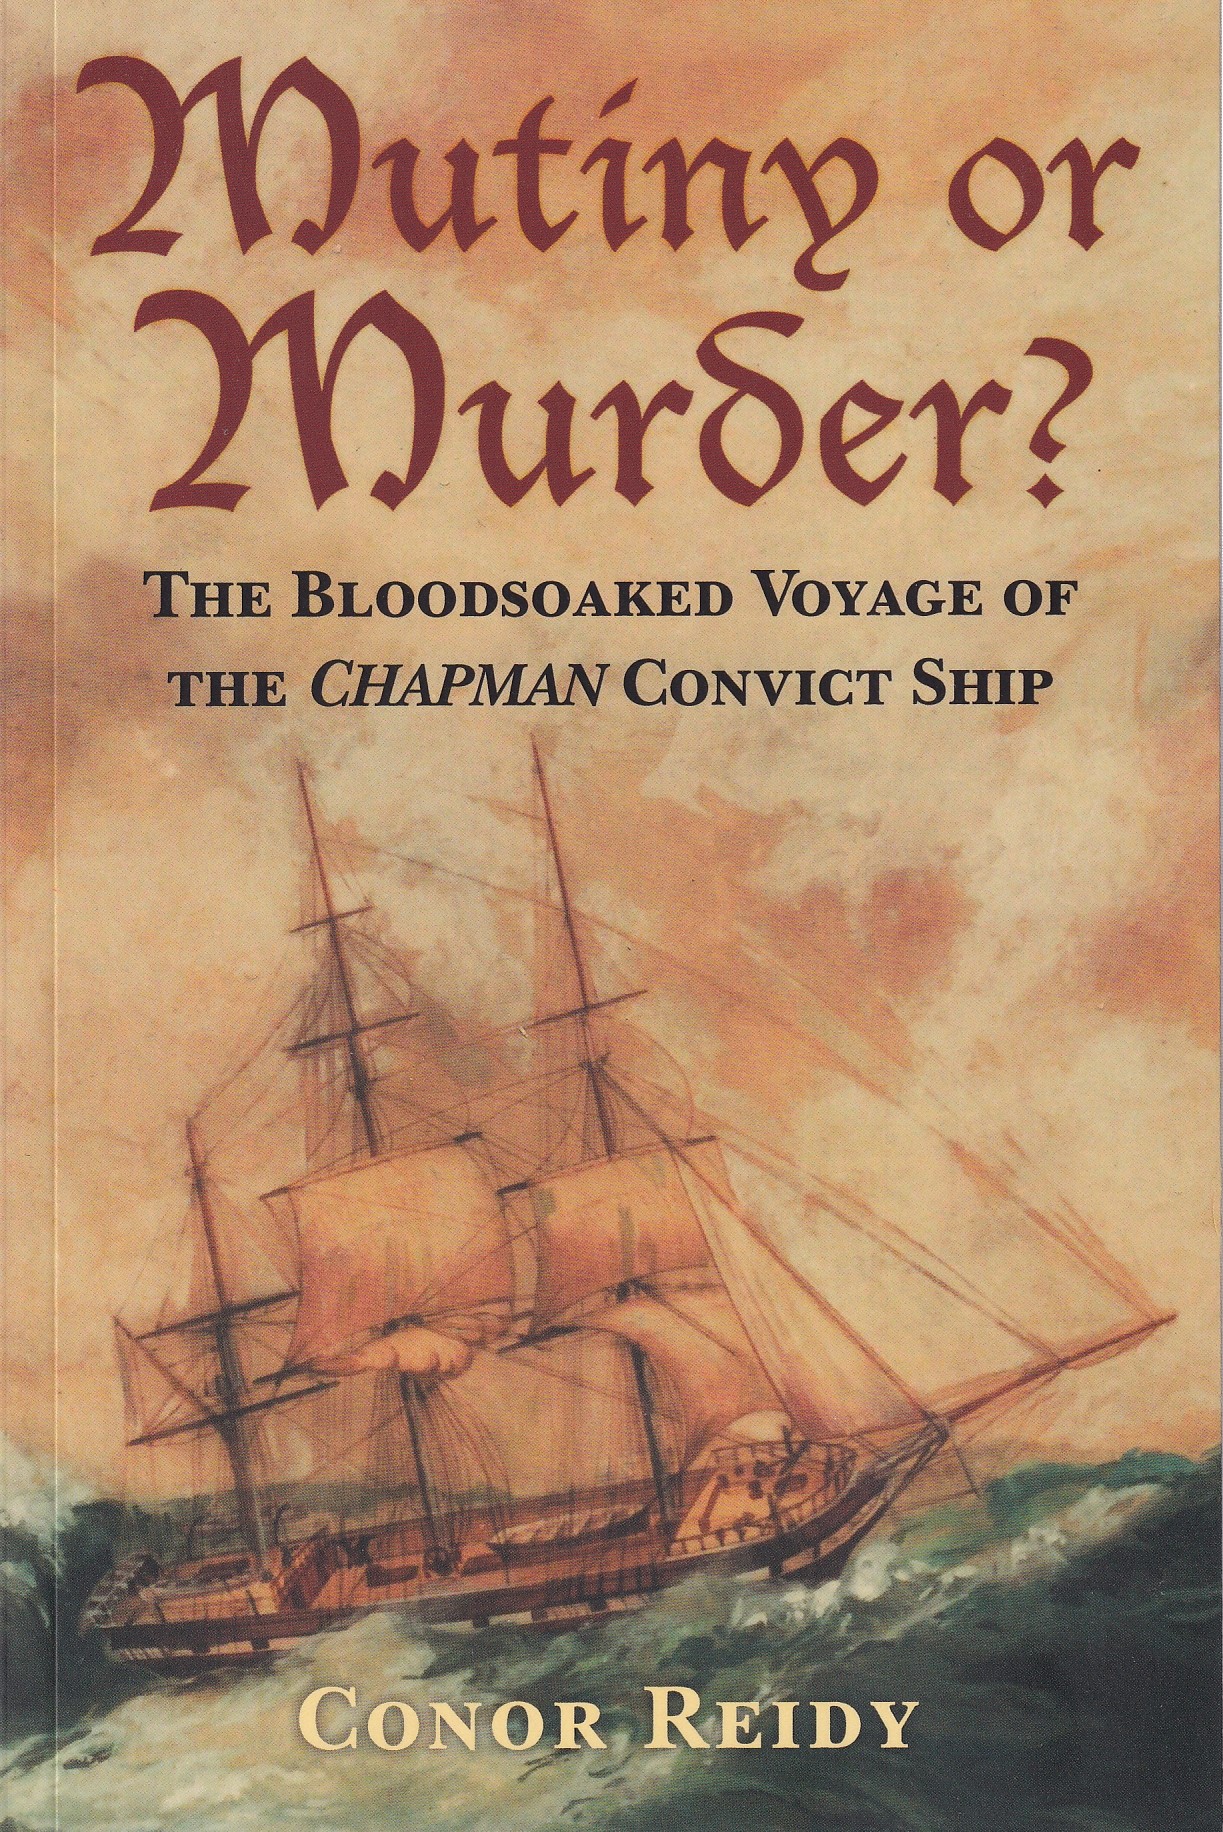 Mutiny or Murder?: The Bloodsoaked Voyage of the Chapman Convict Ship by Conor Reidy